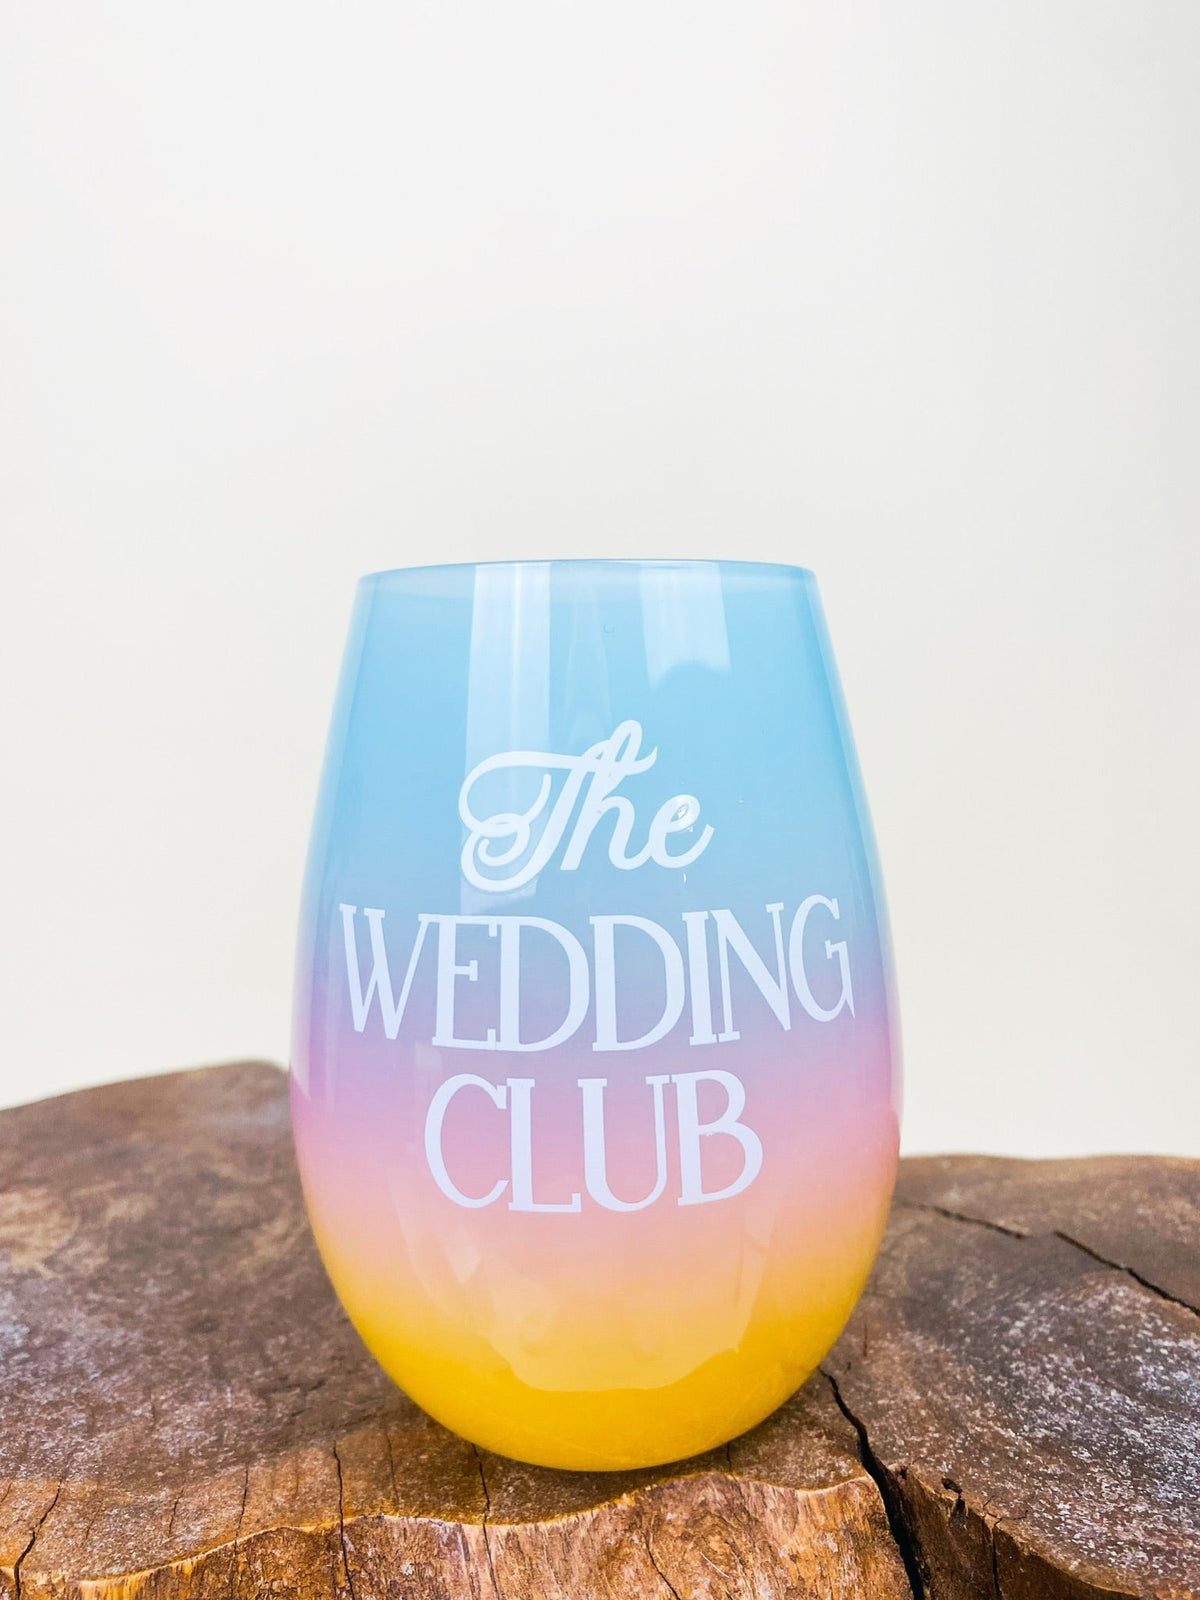 The wedding club wine glass - Trendy Tumblers, Mugs and Cups at Lush Fashion Lounge Boutique in Oklahoma City